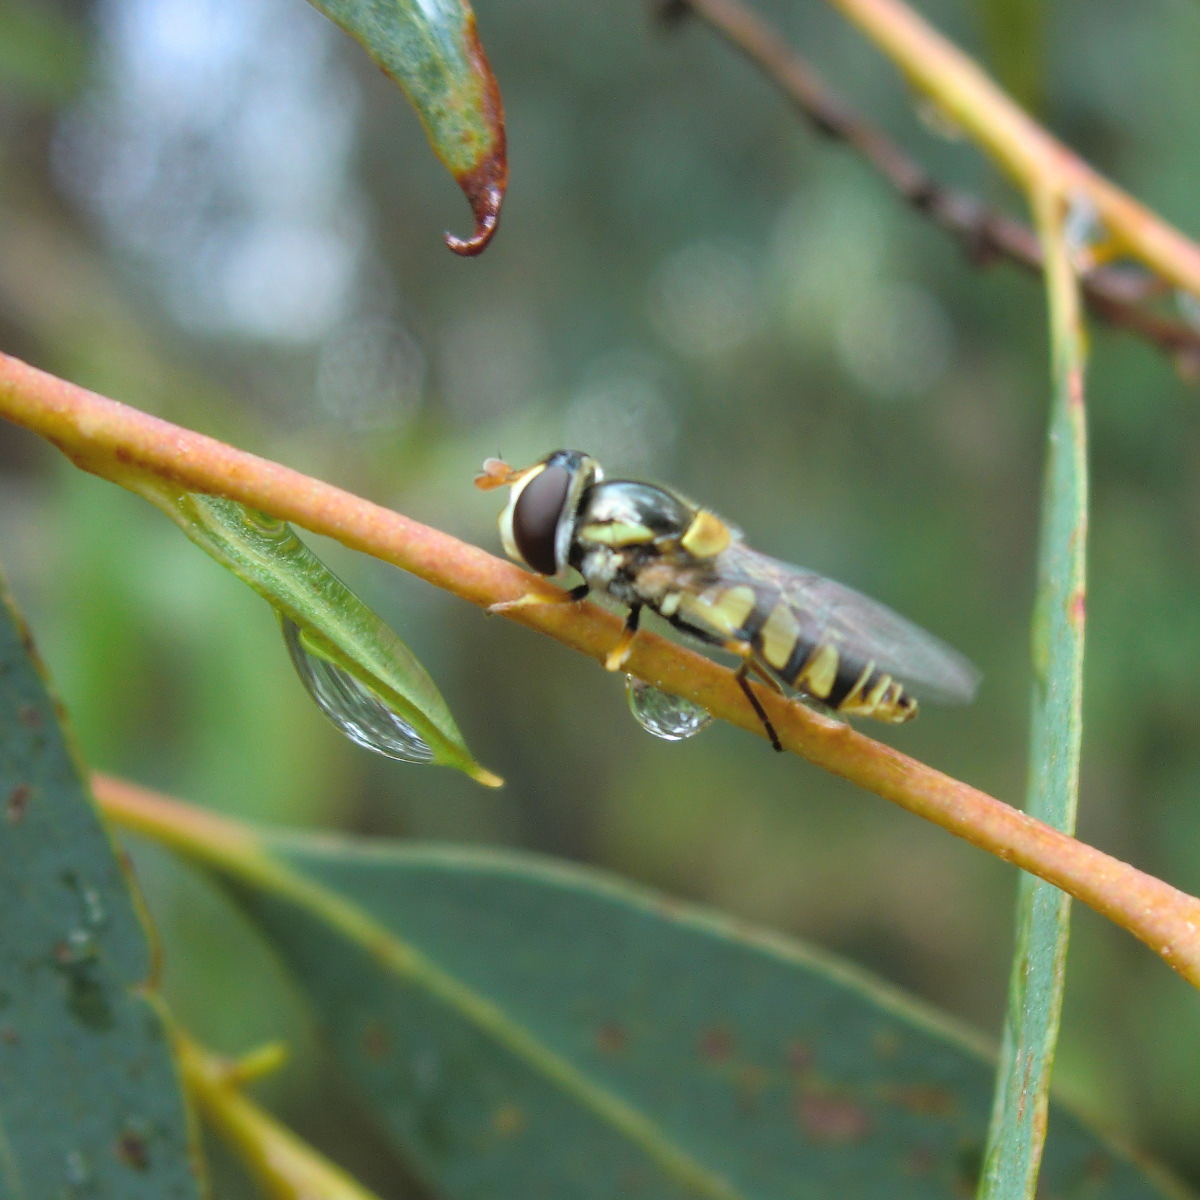 White shouldered hoverfly